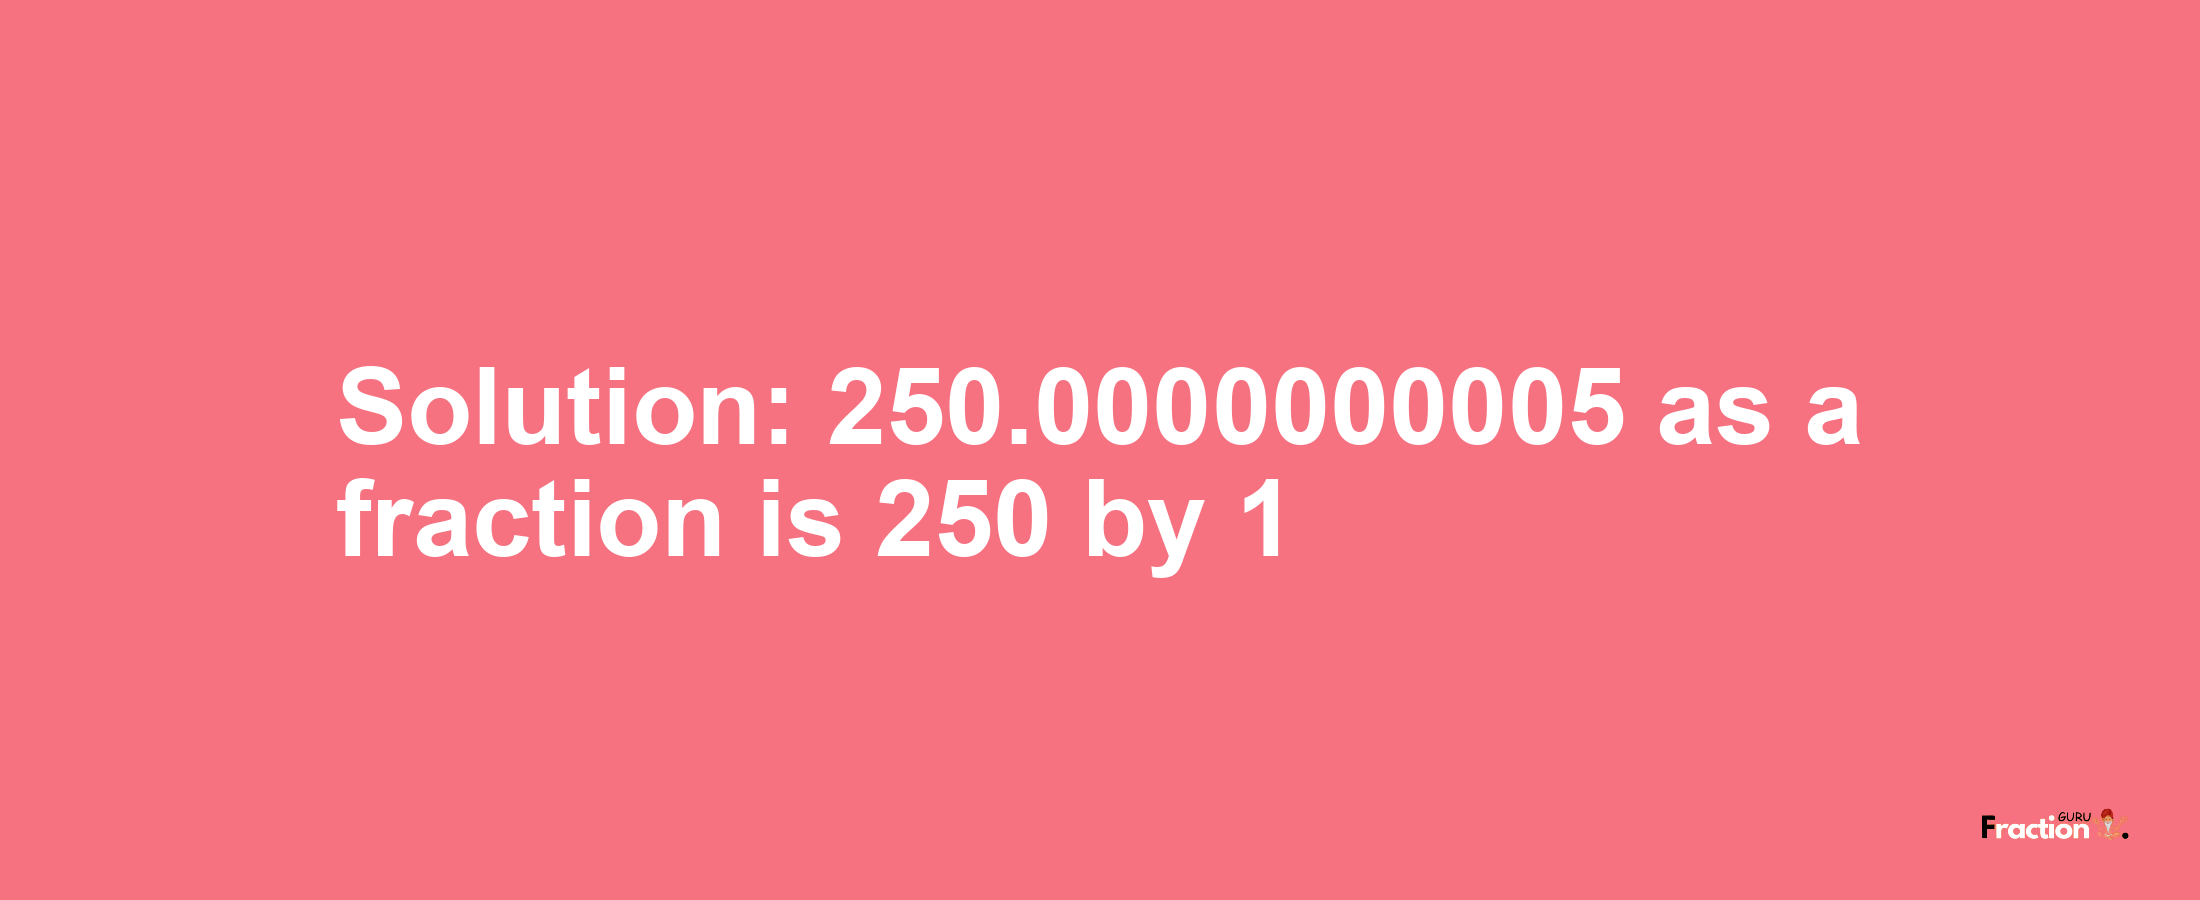 Solution:250.0000000005 as a fraction is 250/1